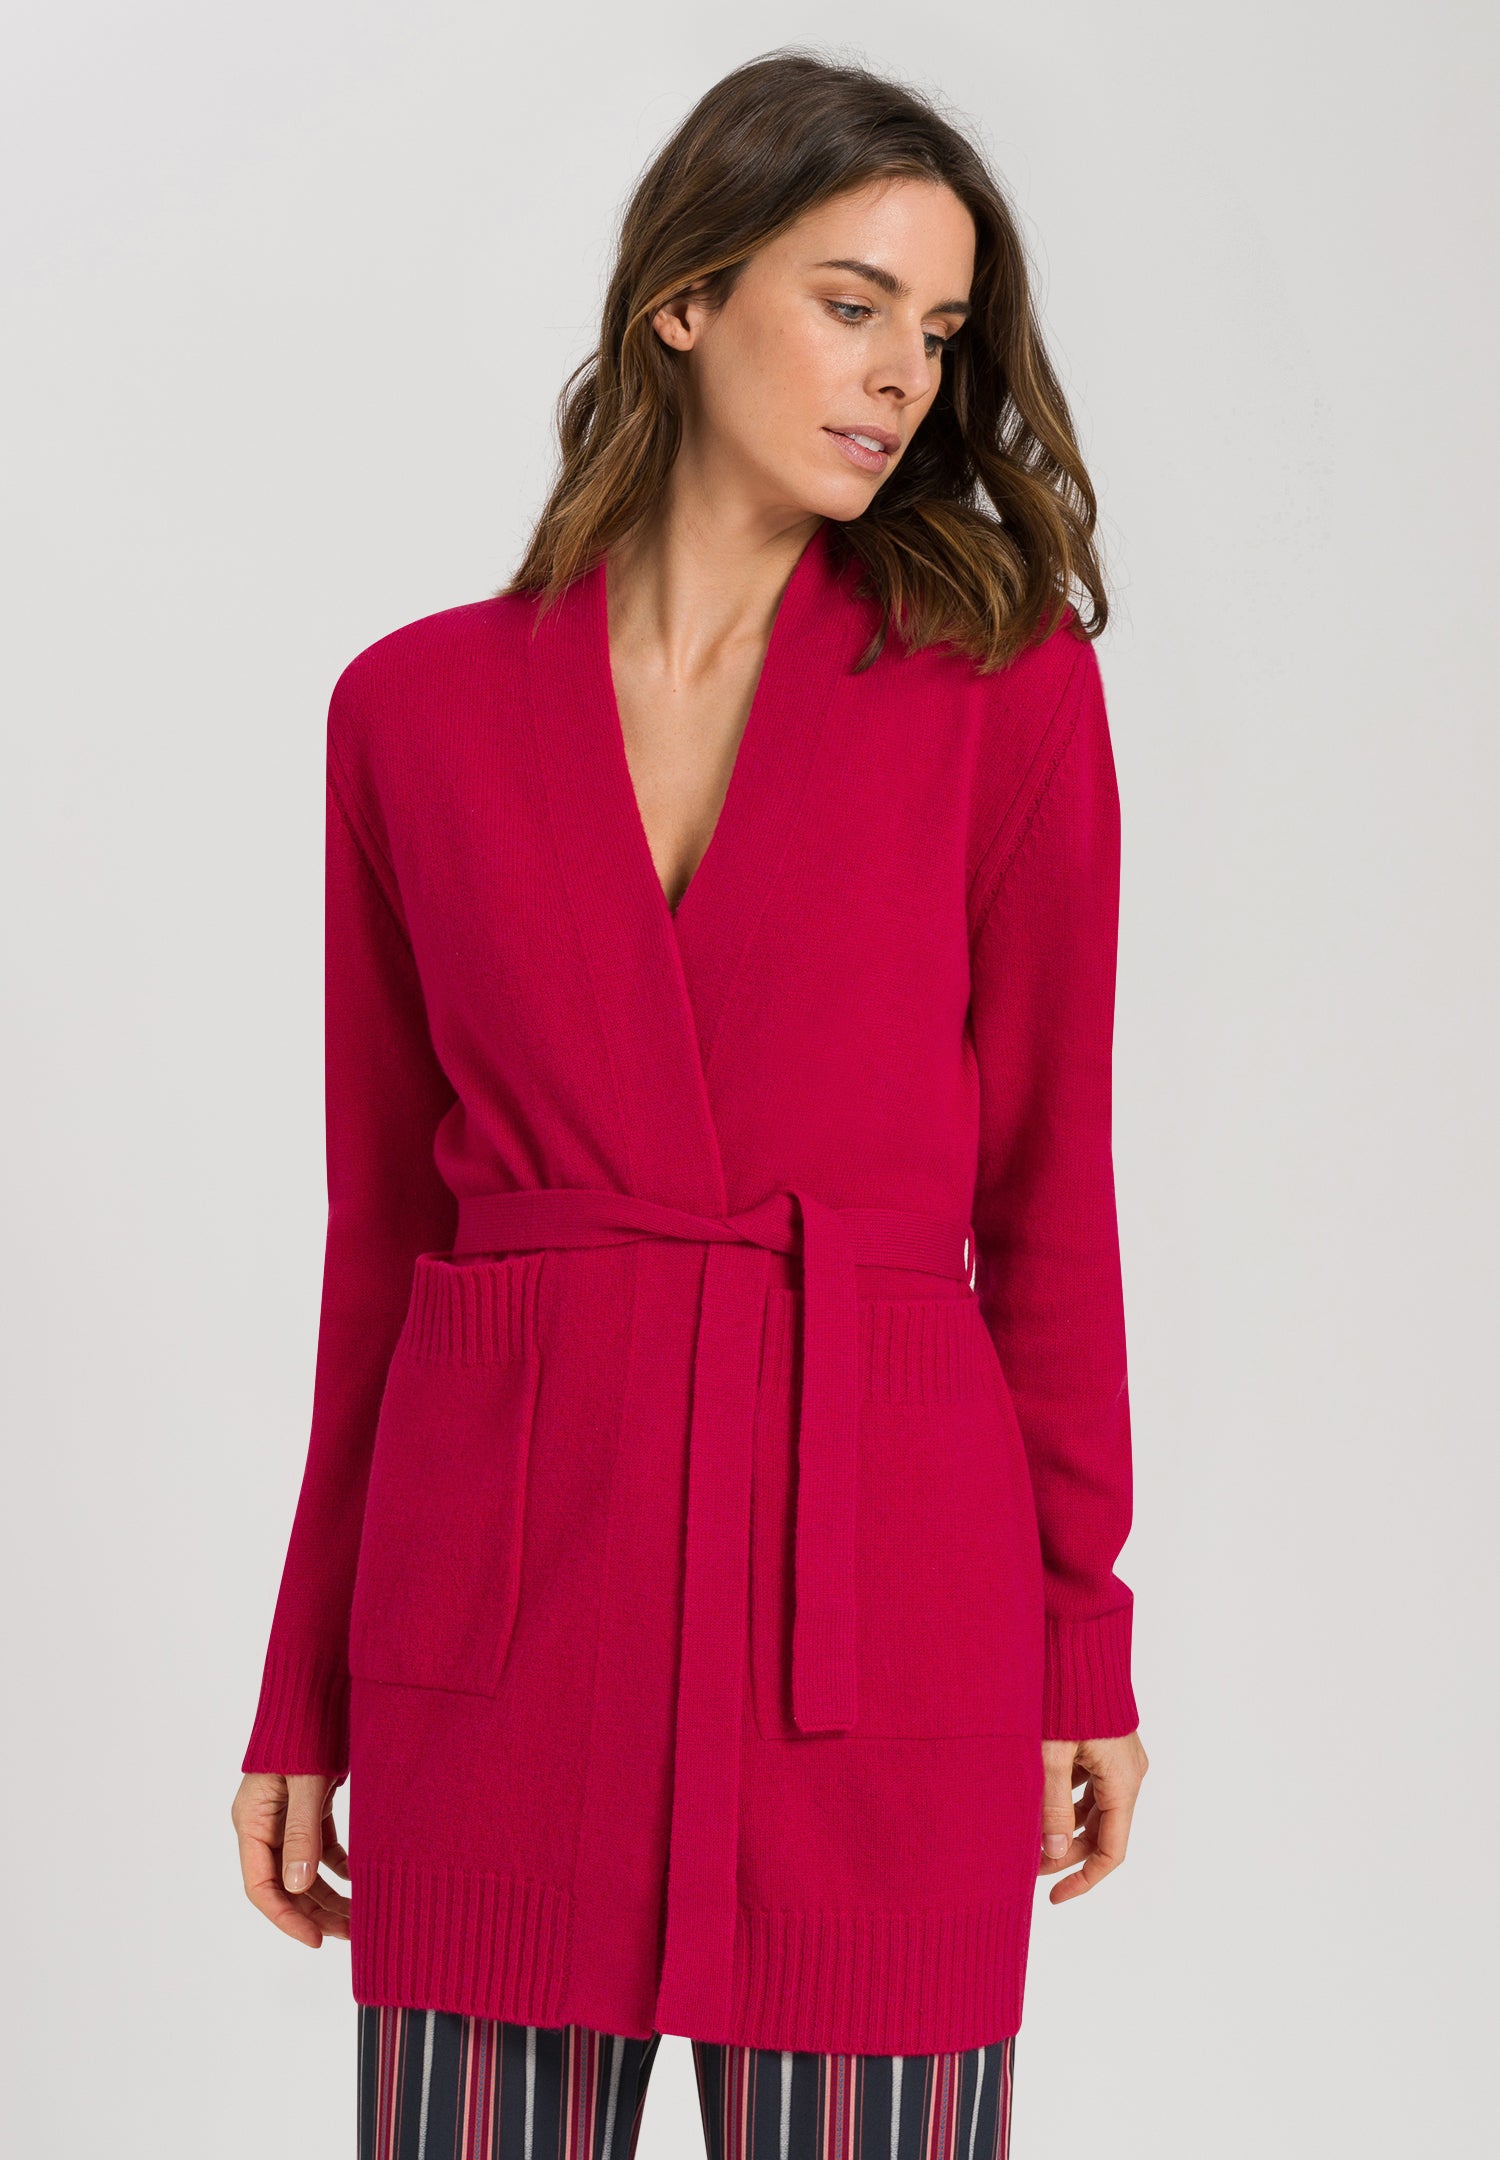 78700 Knits Belted Cardigan - 2310 Pink Mimosa